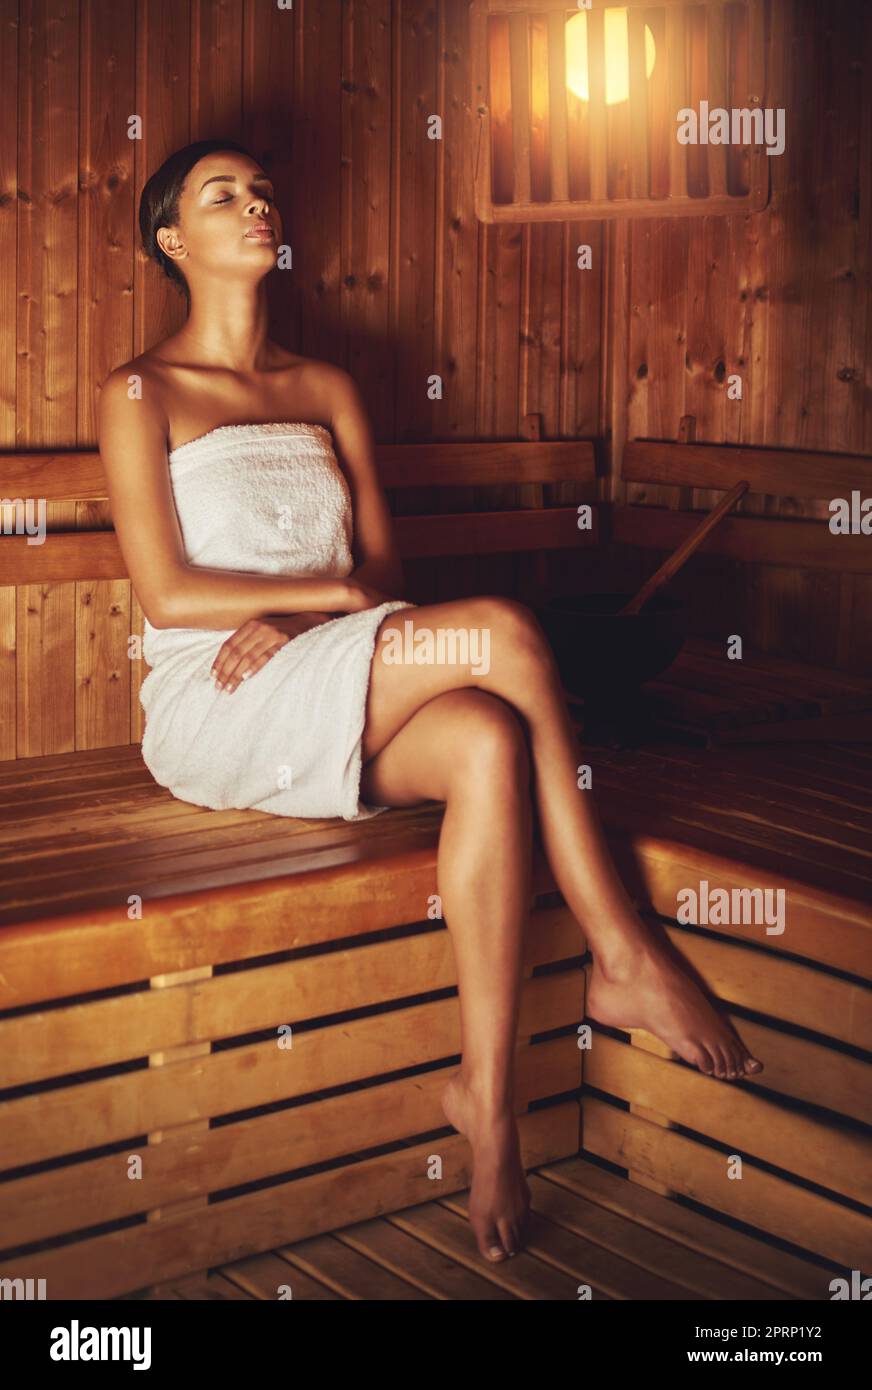 Letting the sauna relax and pamper her. Full length shot of a young woman relaxing in the sauna at a spa. Stock Photo